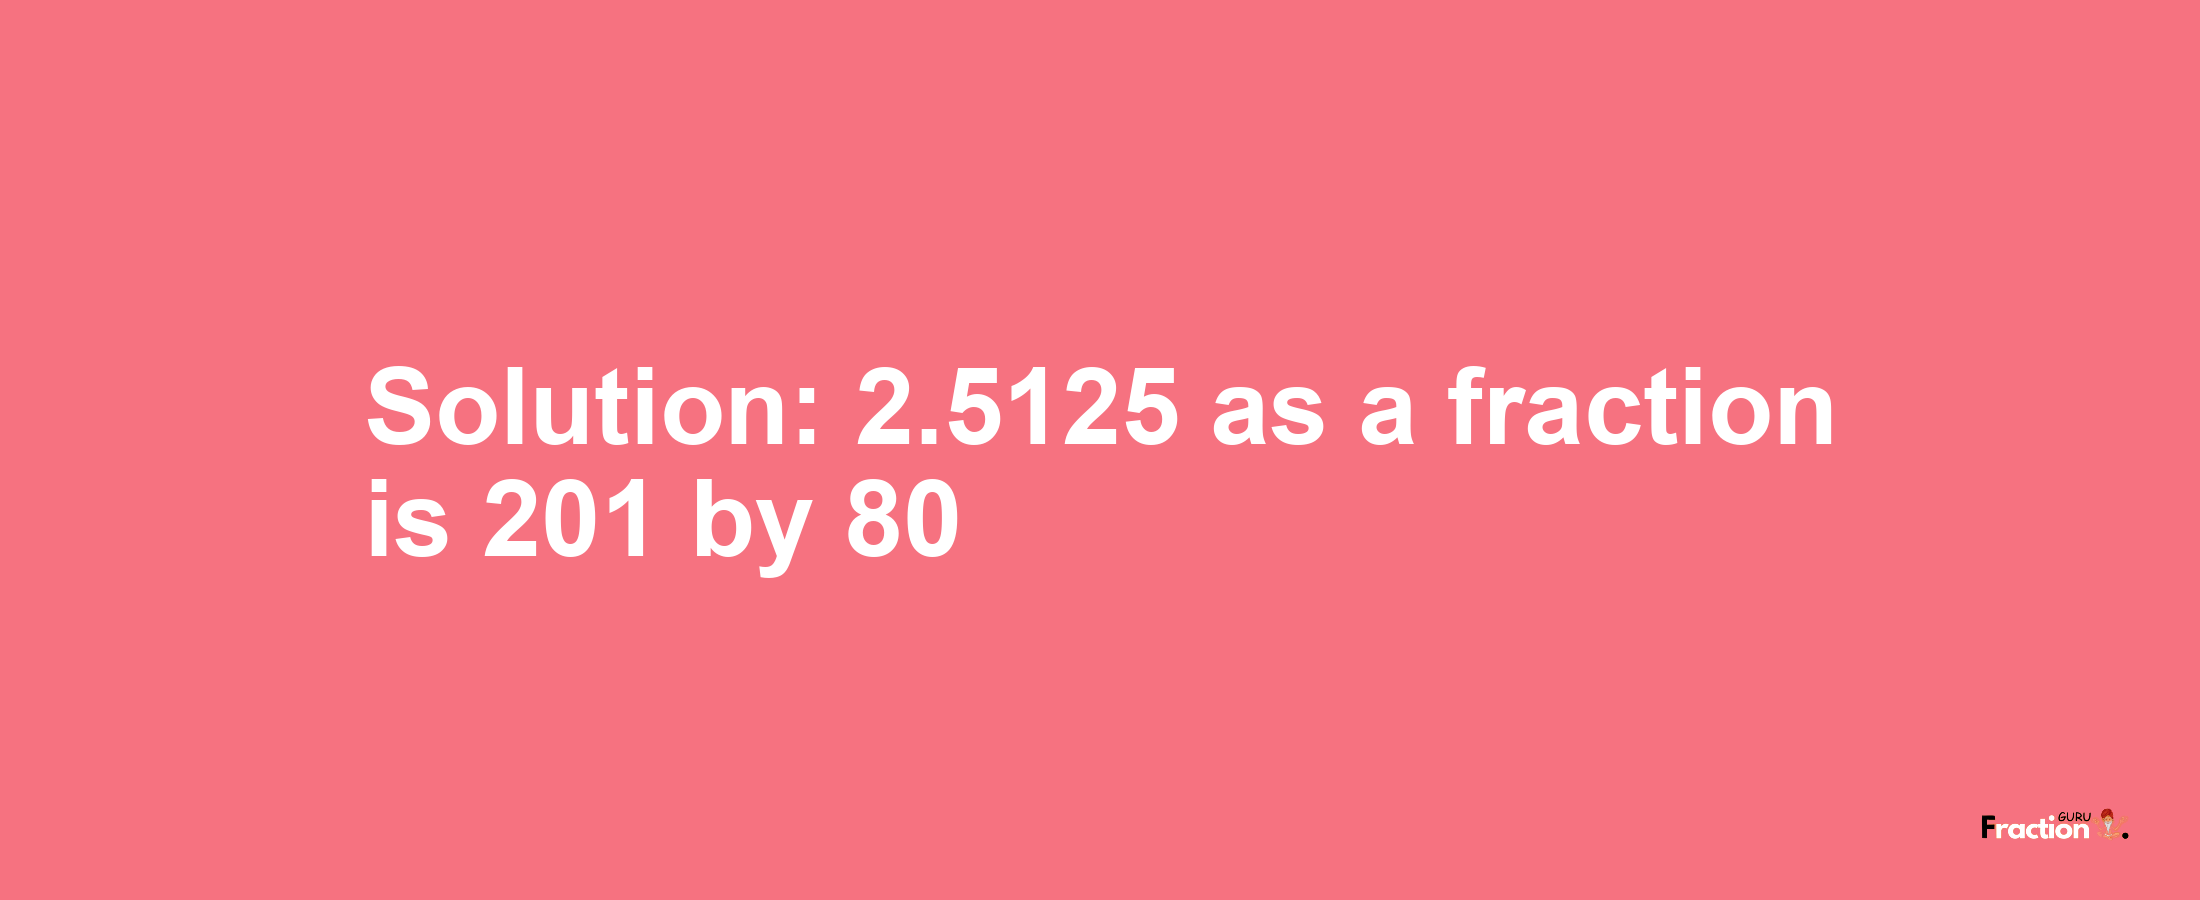 Solution:2.5125 as a fraction is 201/80